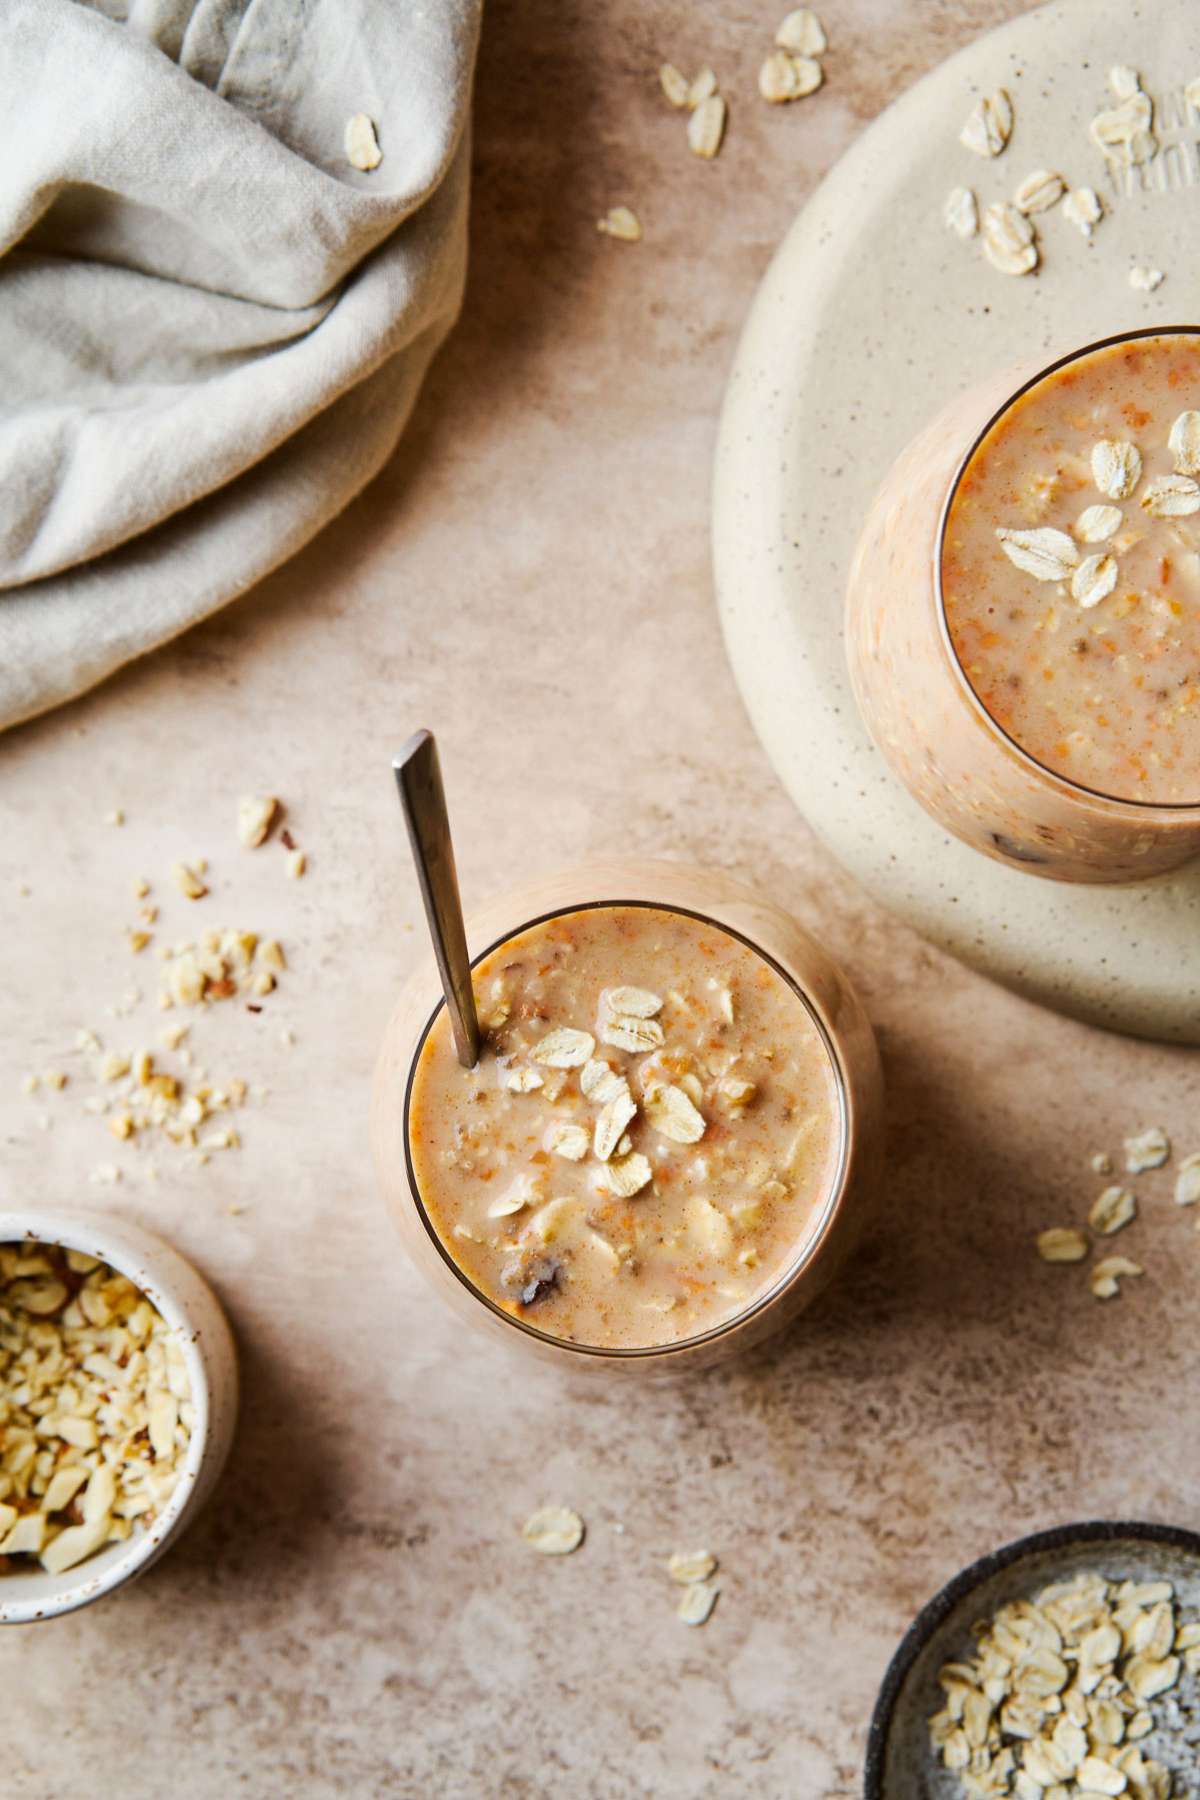 Overnight oats in a small glass with a spoon.